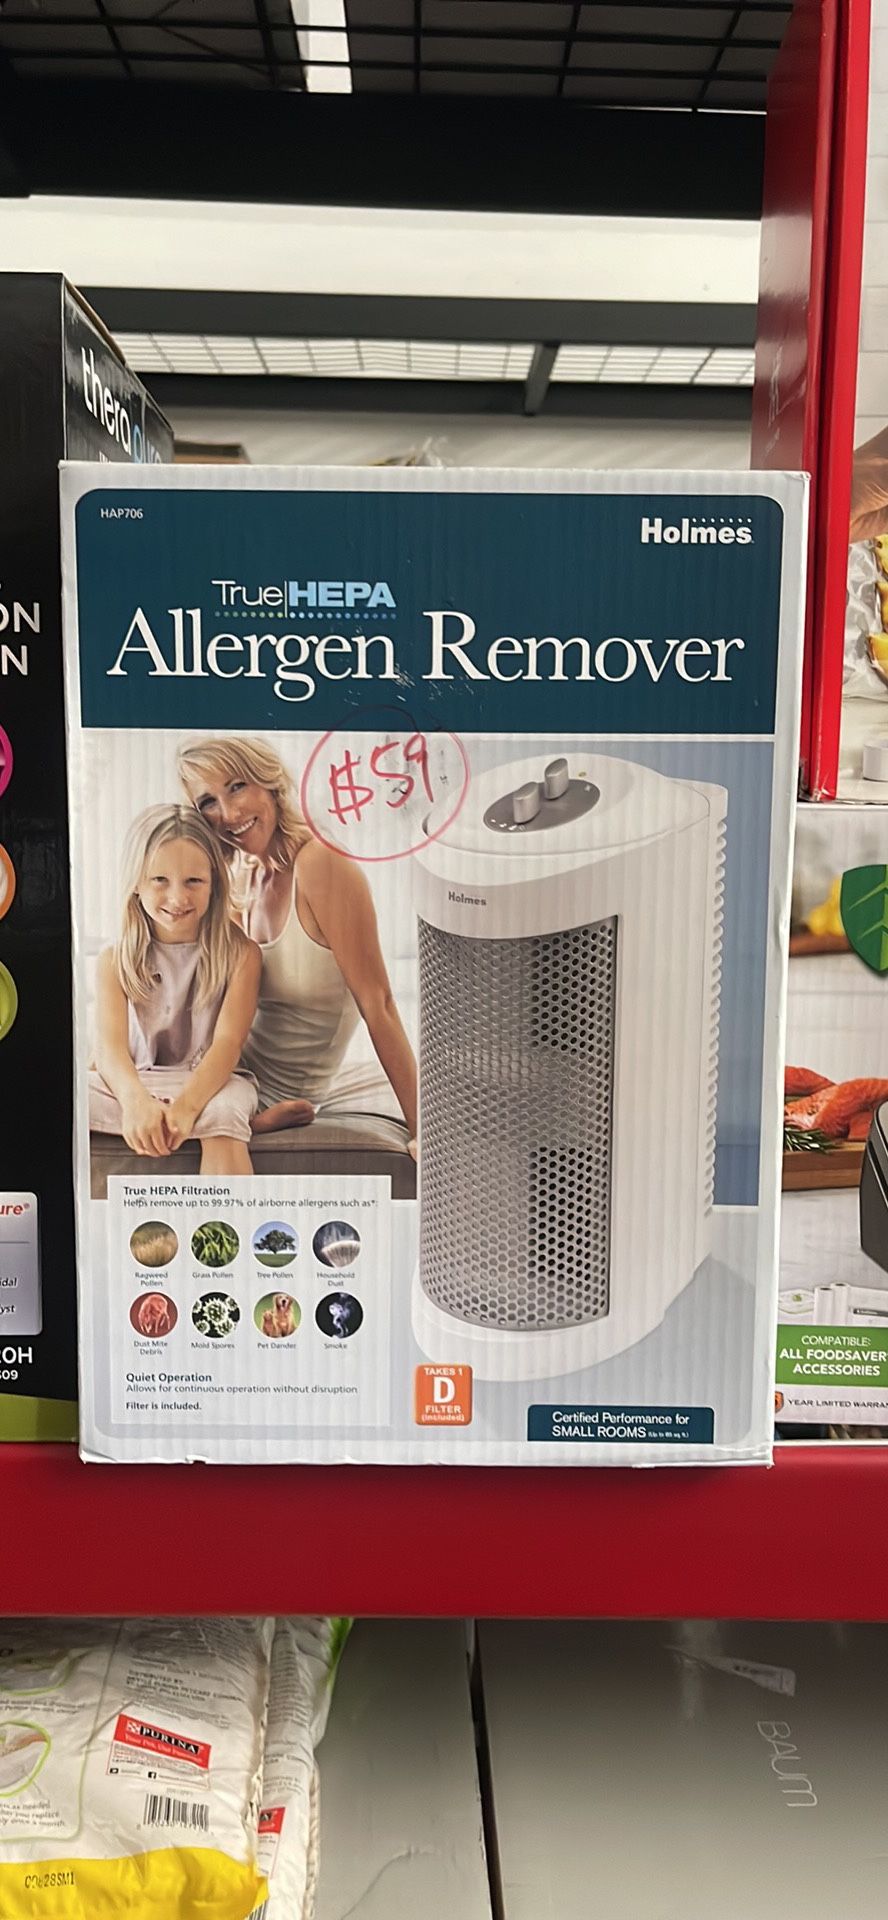 Holmes True HEPA Allergen Remover Mini Tower Air Purifier with Optional Ionizer | Small Space Air Purifier, White (HAP706).